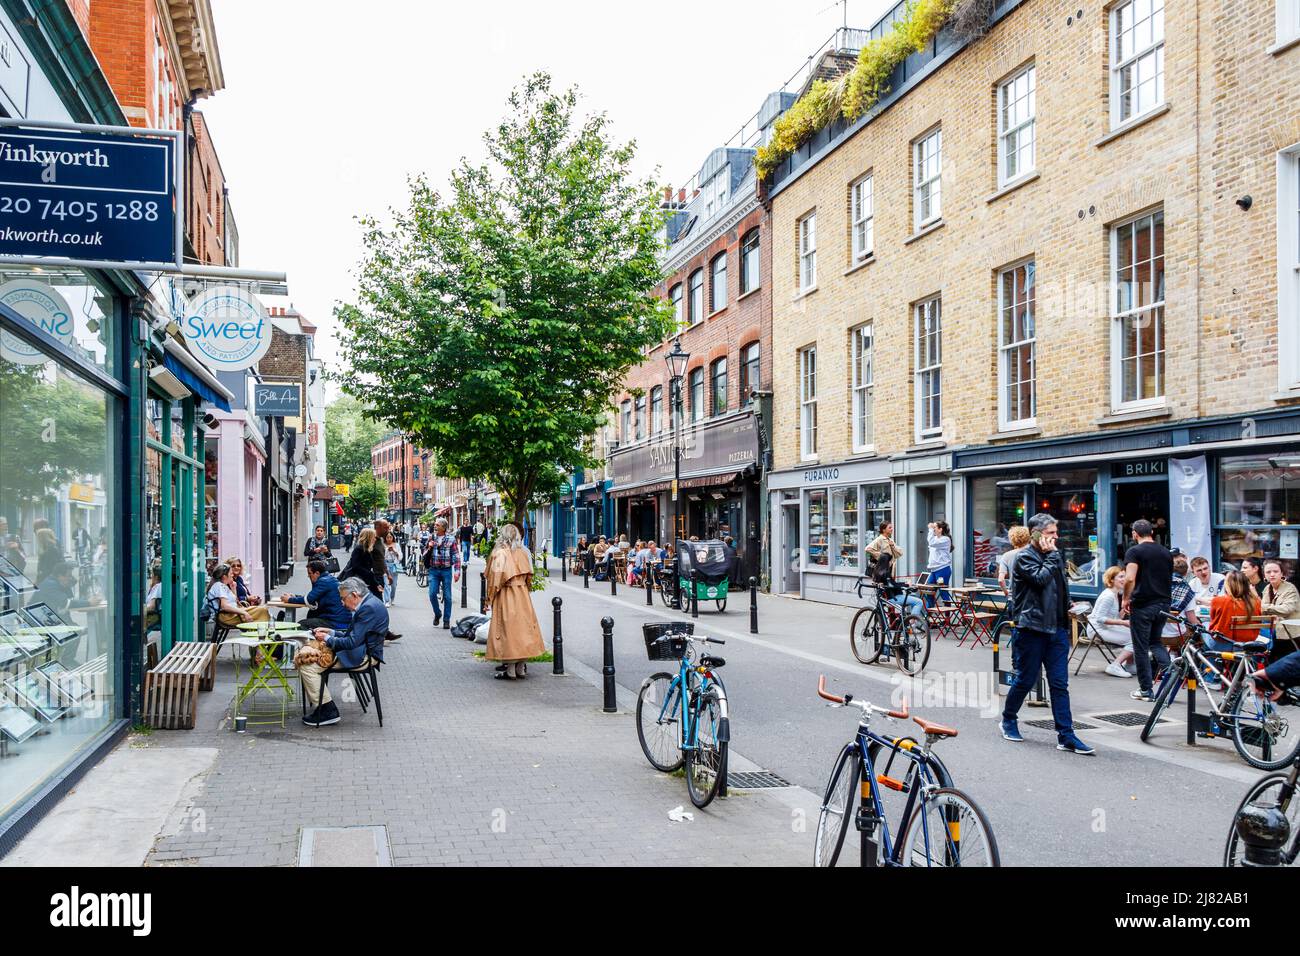 The numerous food outlets, bars, restaurants and shops of Exmouth Market are a popular lunchtime venue for workers in Clerkenwell, London, UK Stock Photo